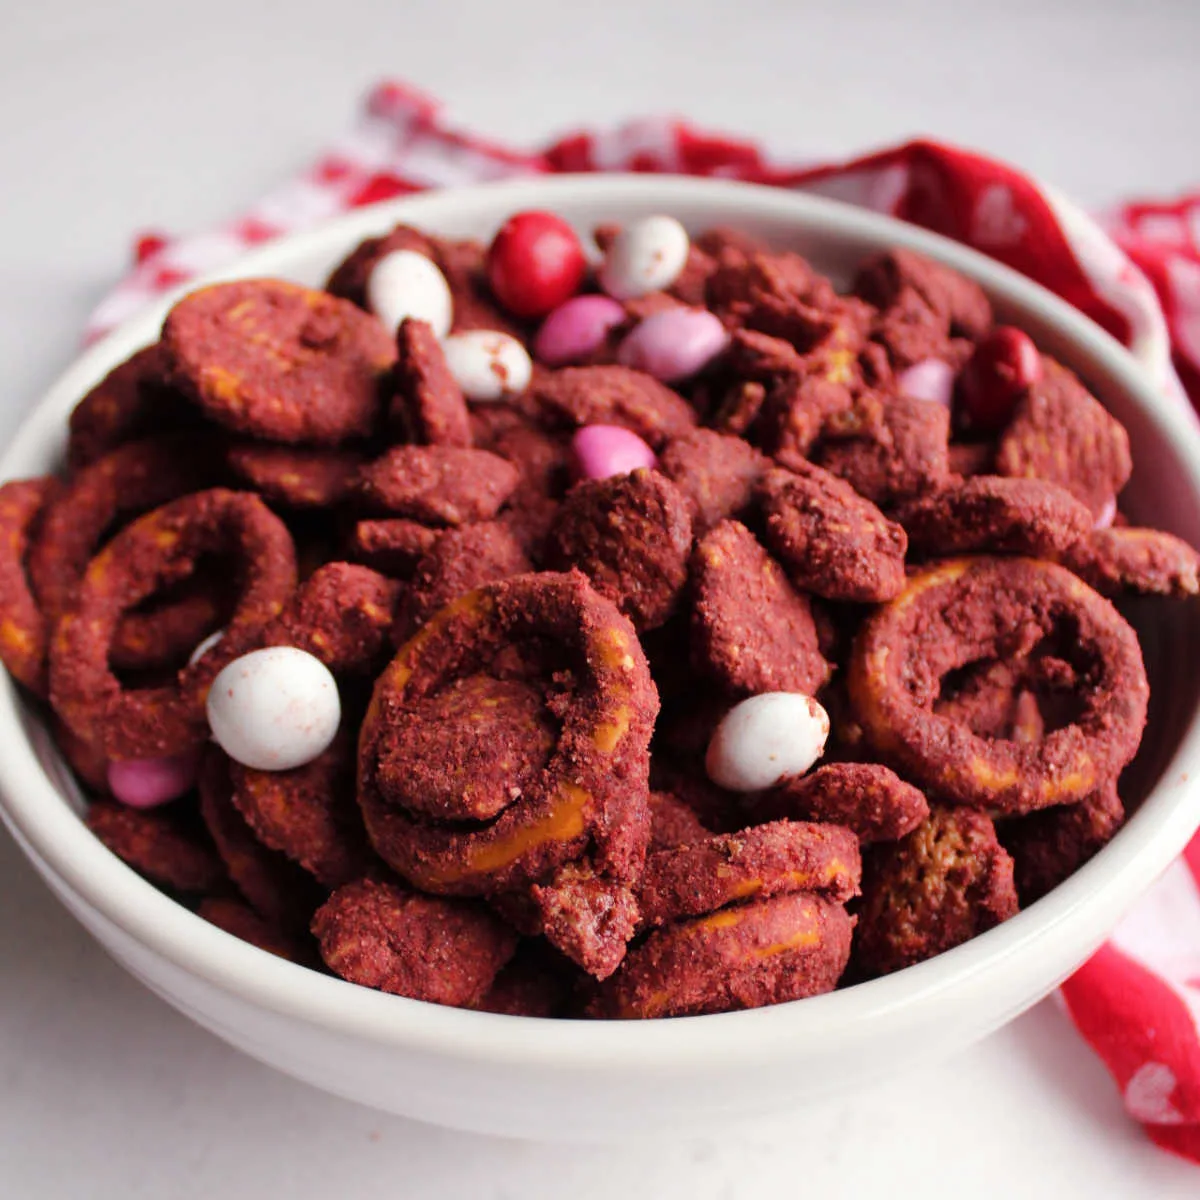 bowl of red velvet muddy buddies with pretzels and candies